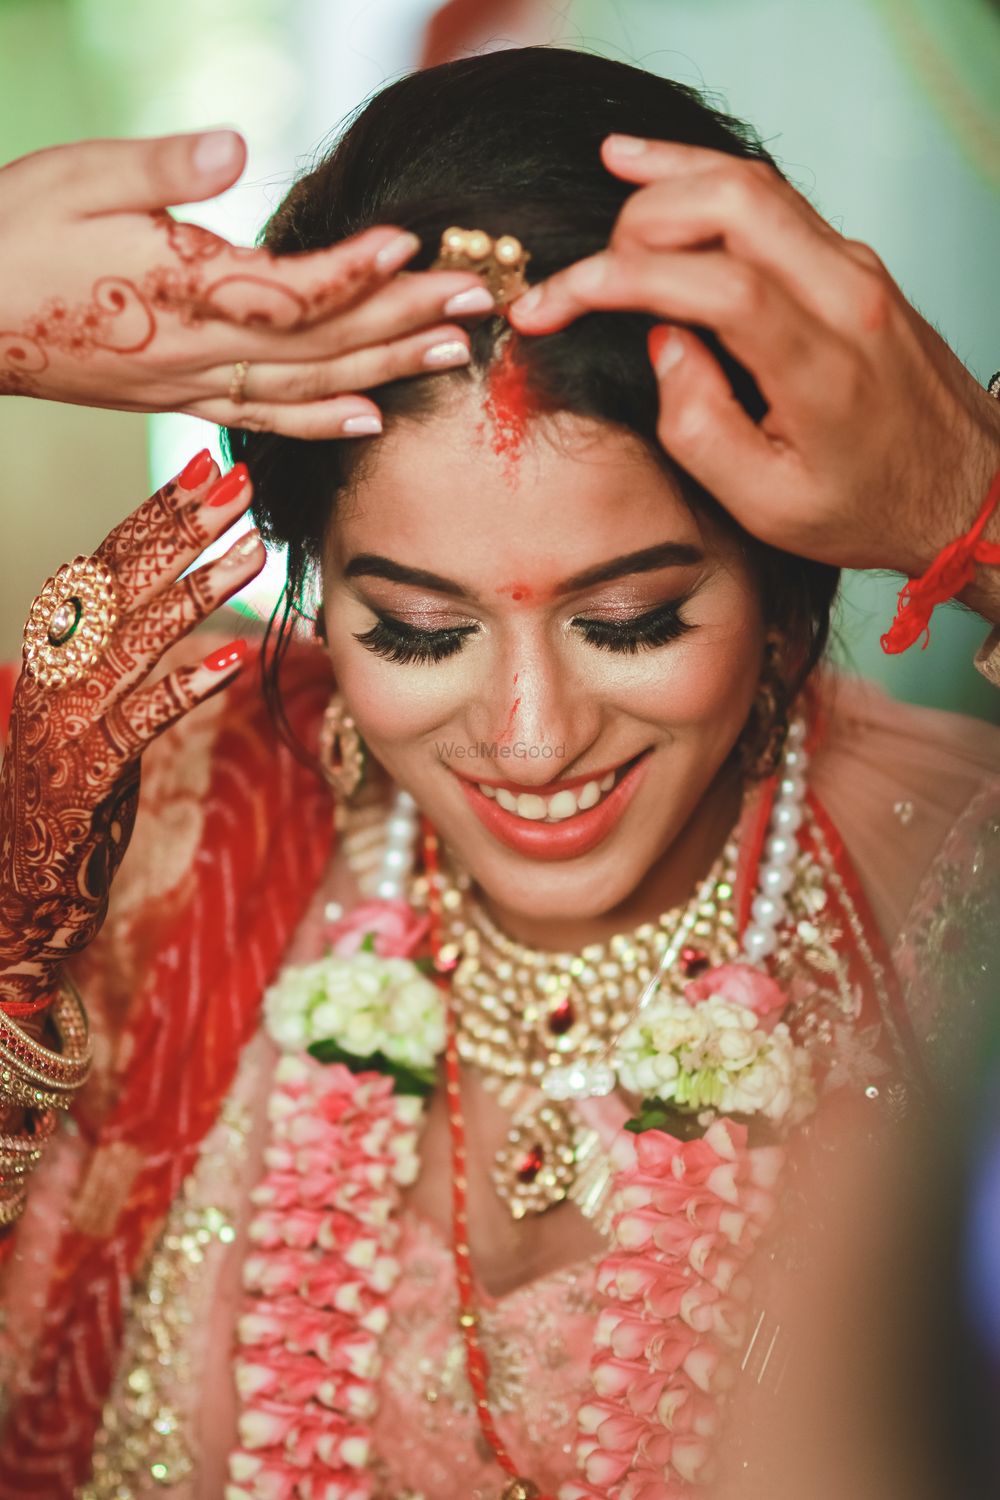 Photo From Namrata & Bhairav Wedding Day  - By Clicksunlimited Photography